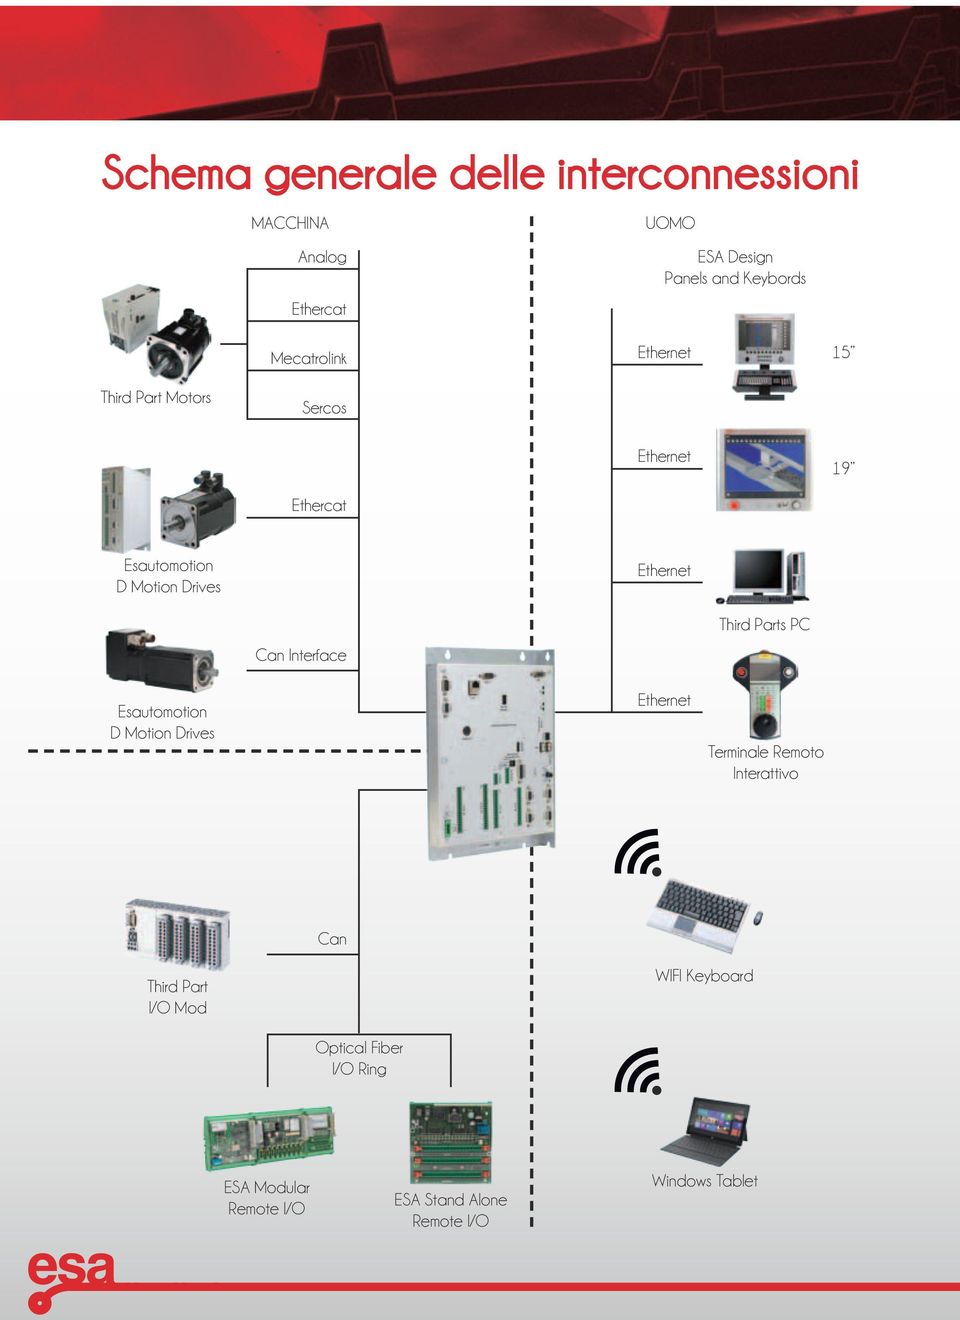 Can Interface Third Parts PC Esautomotion D Motion Drives Ethernet Terminale Remoto Interattivo Can Third